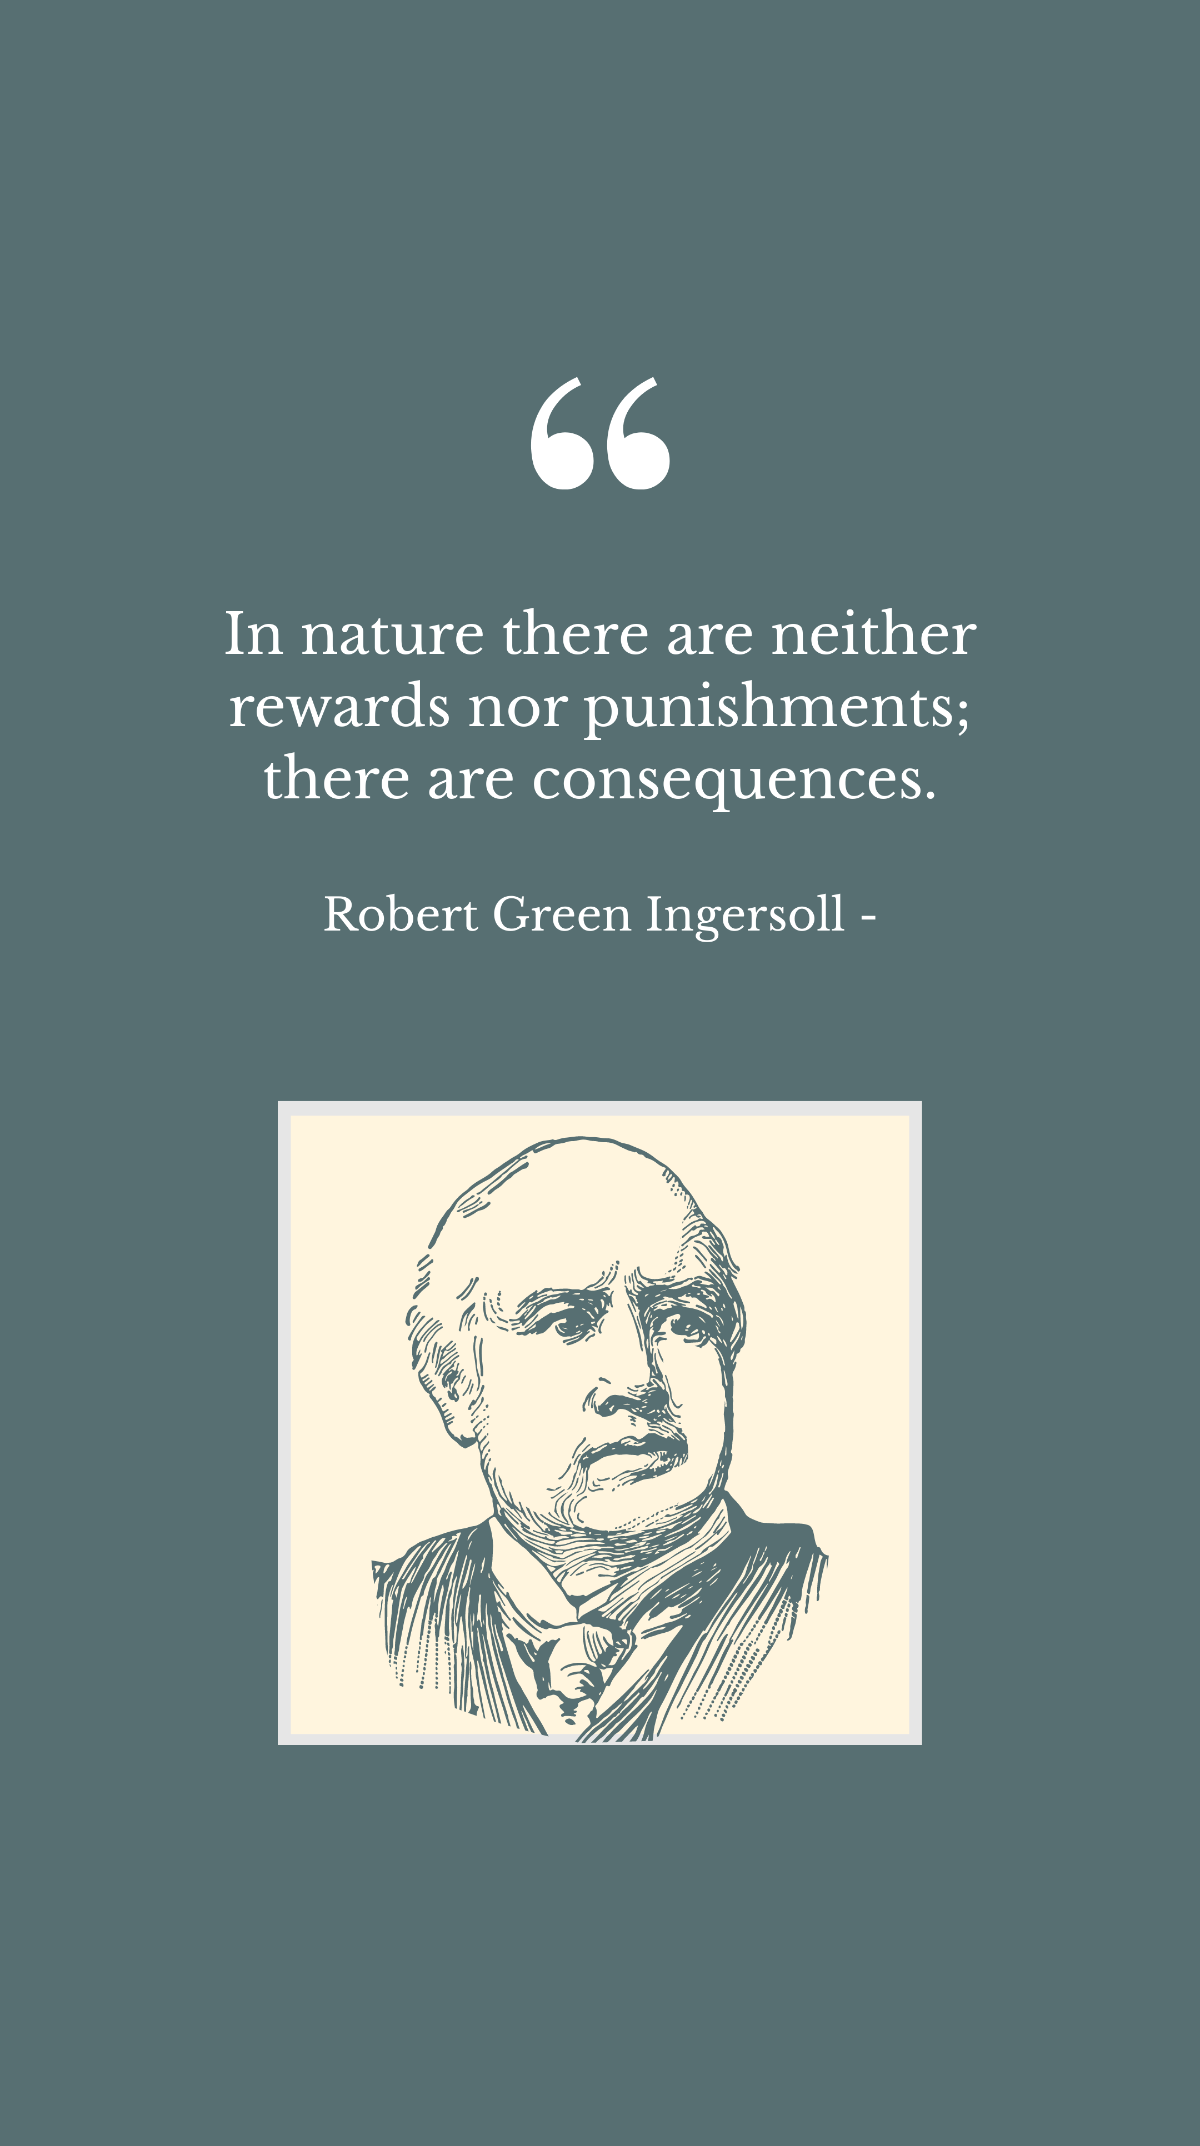 Robert Green Ingersoll - In nature there are neither rewards nor punishments; there are consequences.